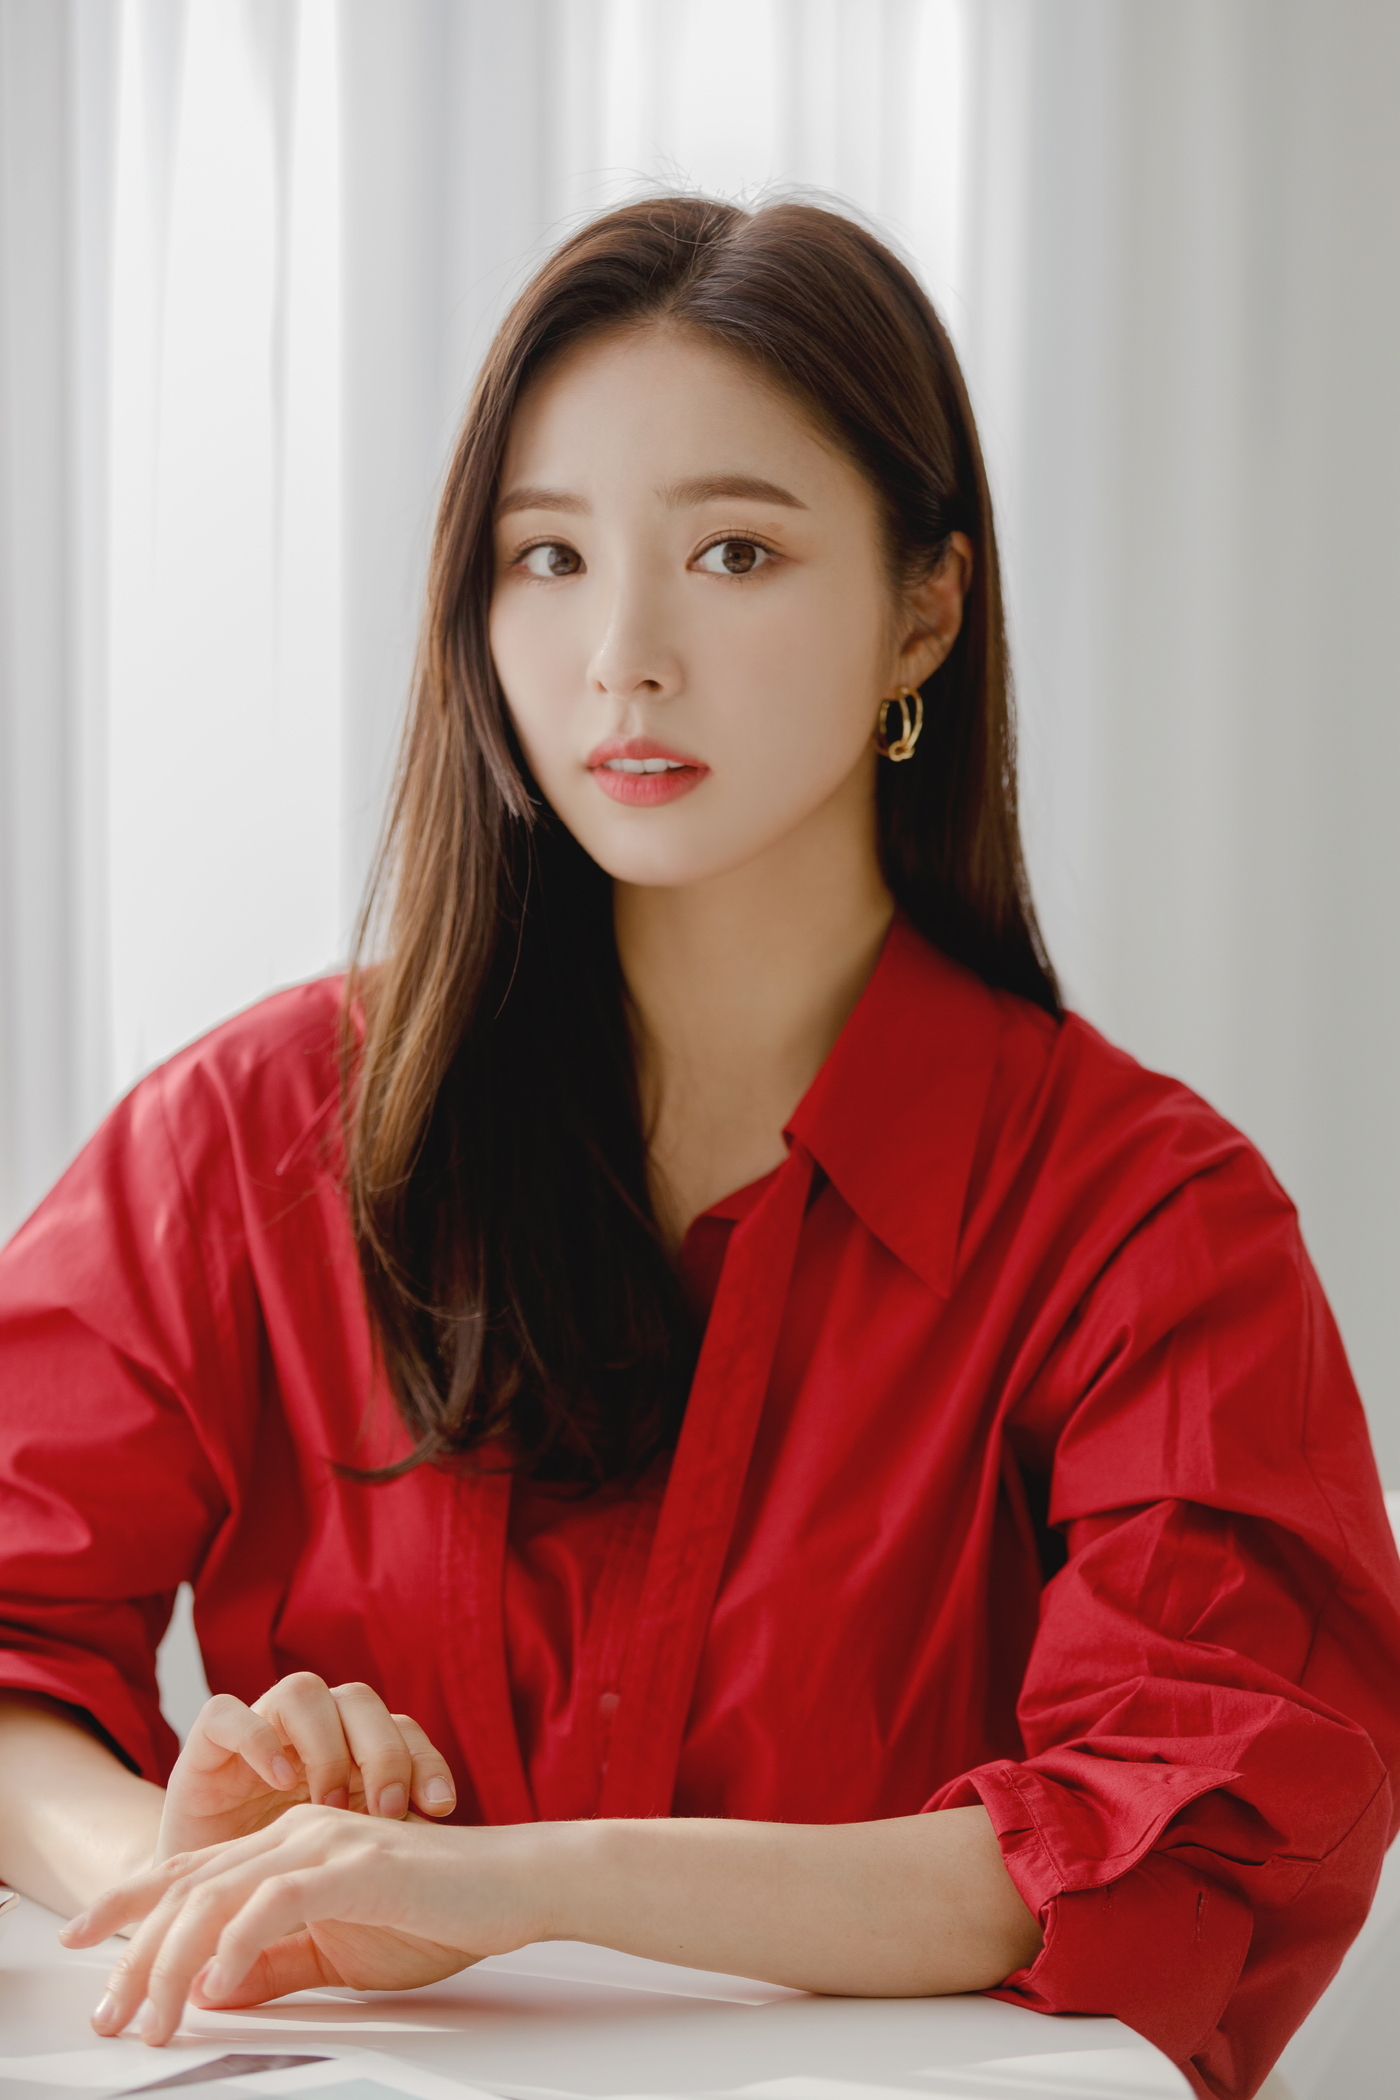 On the 24th, the agency Tree Essence announced the news of Shin Se-kyungs comeback.Runon is a romance drama with the love of two men and women. Shin Se-kyung is a foreign currency translator with an enterprising tendency and an emotionally honest youthful omiju.Shin Se-kyung hopes how Shin Se-kyung will express the coolness of the Americas, which has a good sense of reality and good and dislike.Run-on officials said, Shin Se-kyung Actor is eligible to express the three-dimensional appearance of youth.I am looking forward to the romance act of Shin Se-kyung now. Shin Se-kyung debuted in 1998 as a poster model for the Seo Taiji Take 5, and was loved for appearing in High Kick Through the Roof, Deep Rooted Tree, Kwon Ryong I Narsa and Black Knight.The line has expanded the spectrum from thick historical drama to smooth romance, building the trust of viewers.Last year, MBC Drama New Entrepreneur Koo Hae-ryong was a big success and won the Grand Prize at the end of the year awards ceremony.In addition, through the YouTube channel Jinsanuna, it was surprising that it was a different way to reveal small daily life.Runon is a work that coincides with Lee Jae-hoon, who directed Drama Kim Kwa-jang, and new artist Park Si-hyun. He will finish casting the main cast and start shooting in summer and broadcast this winter.